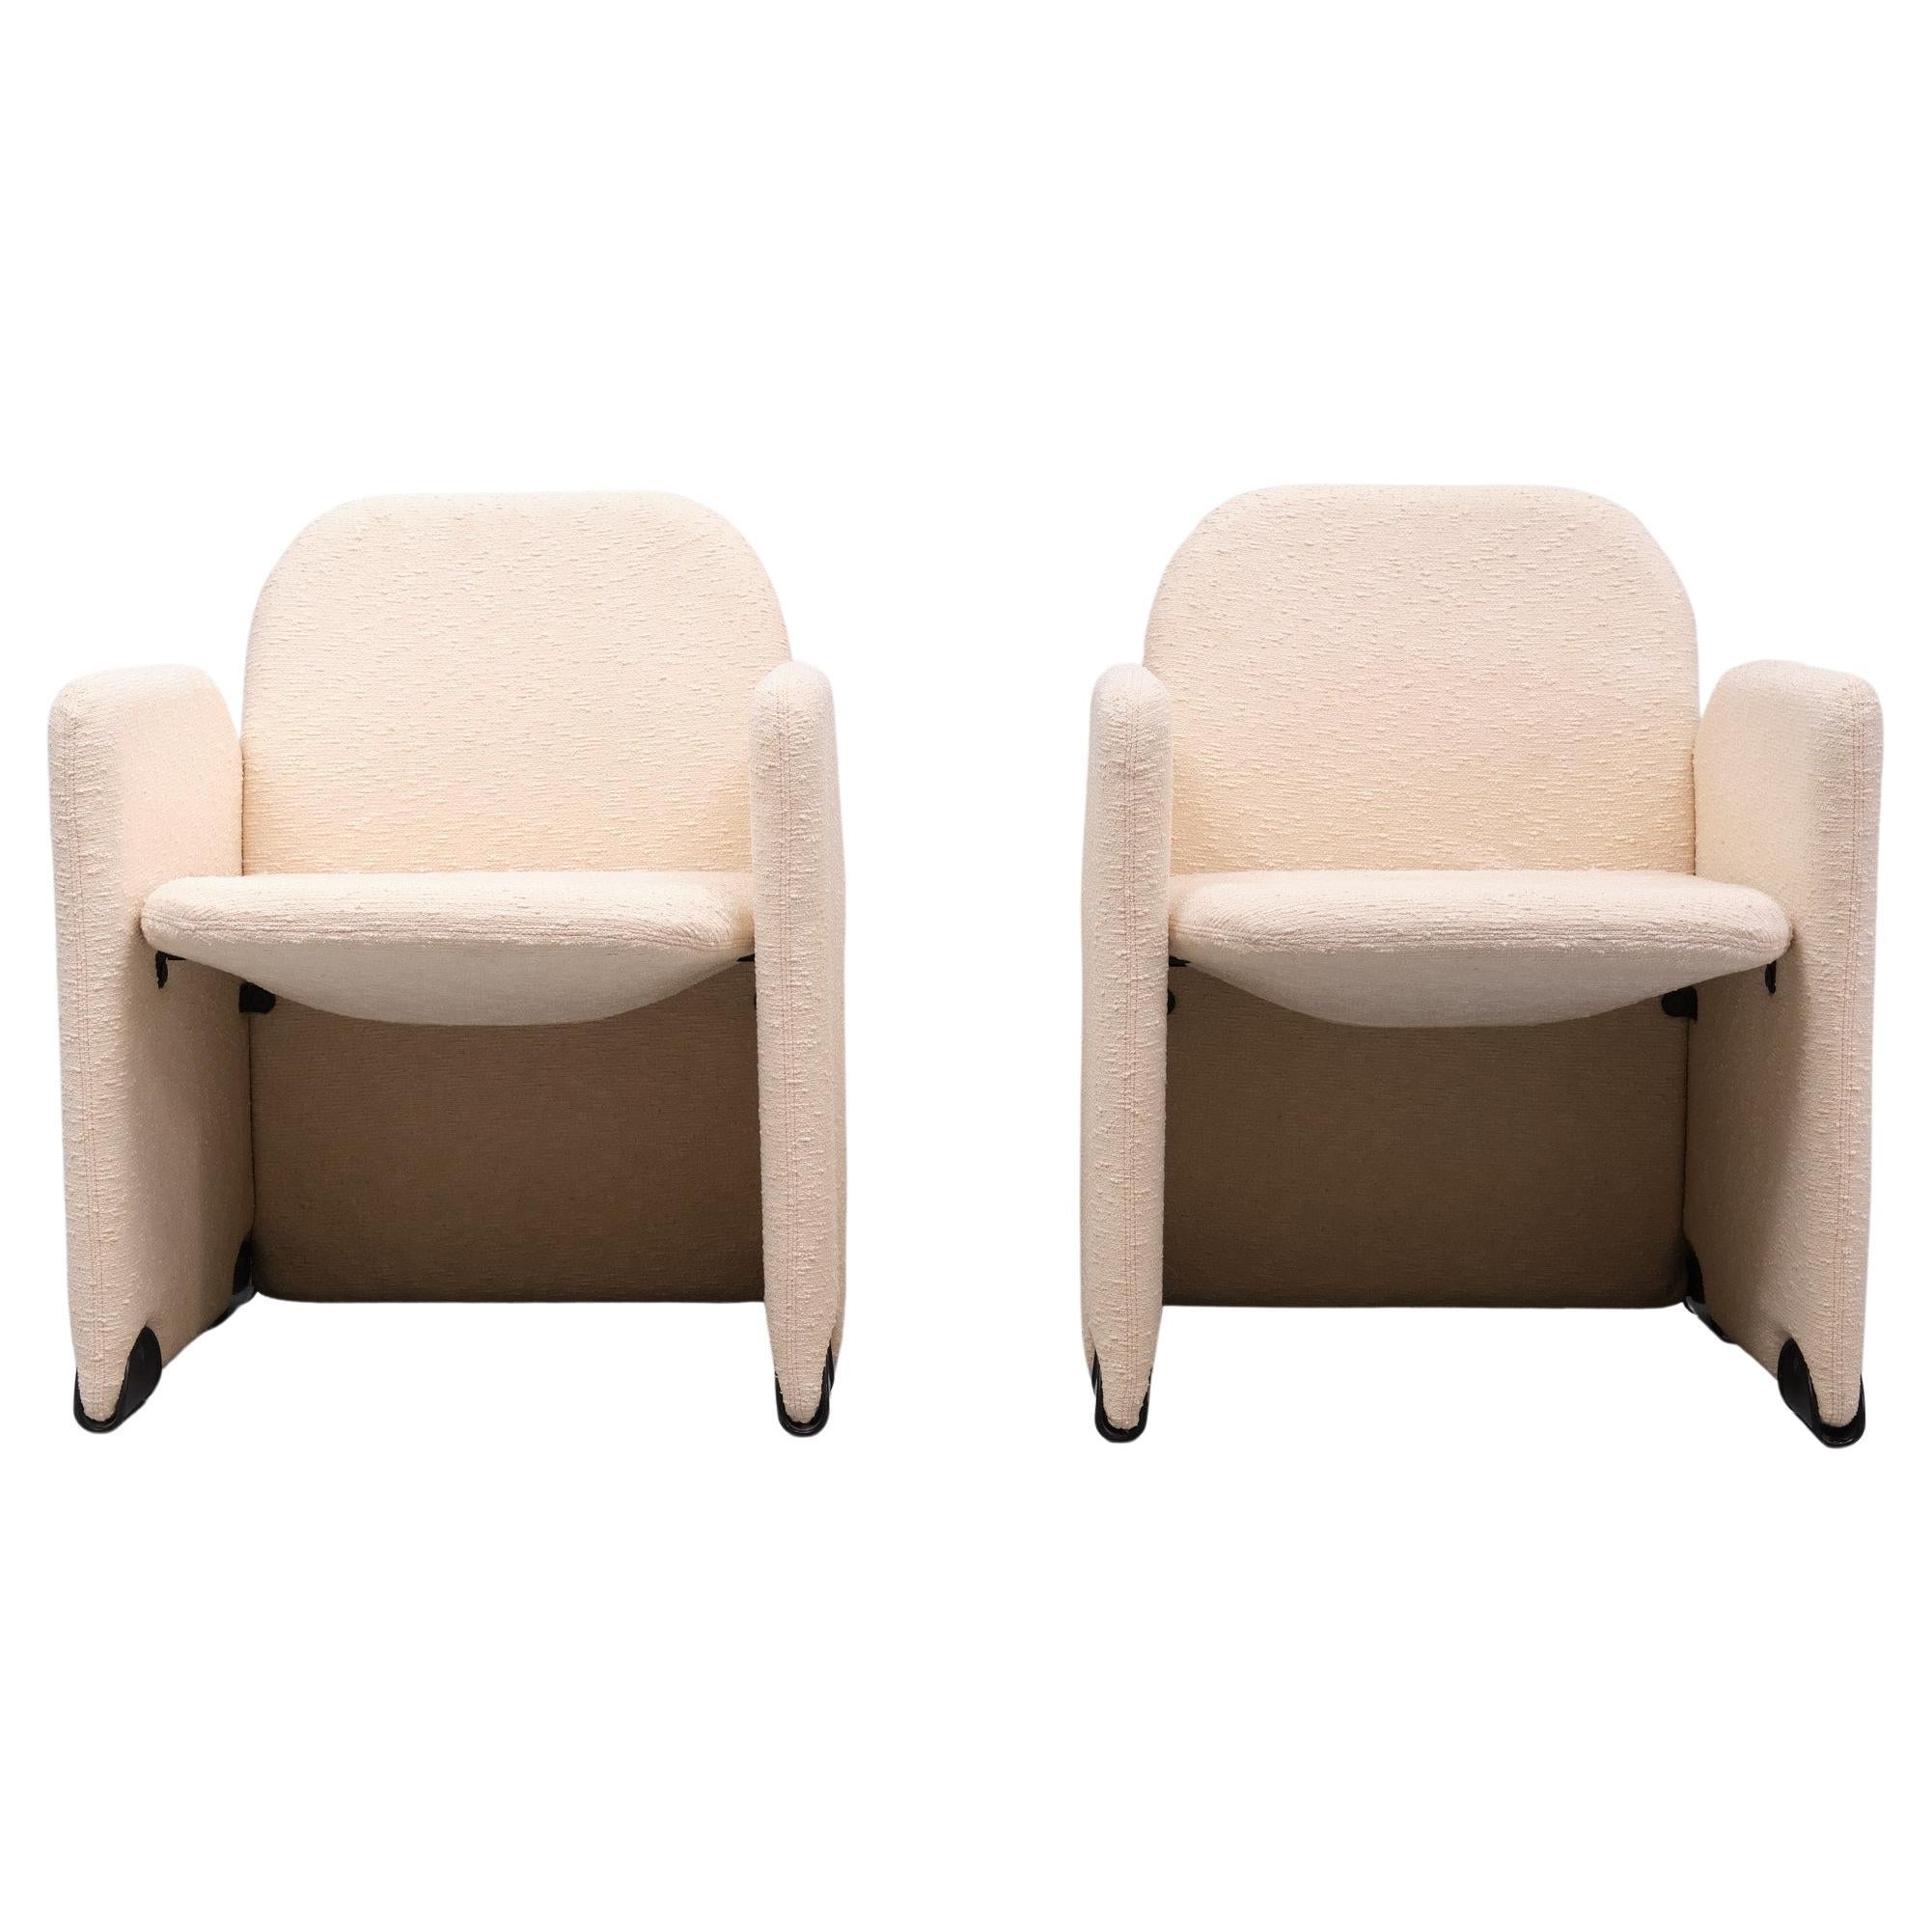 Beautiful curves  on these vintage 70's designer Italian chairs . Designed by Ammannati and Vitelli for Brunati.  Original Ivory color  boucle fabric with contrasting signed black plastic footers. In good vintage condition. 